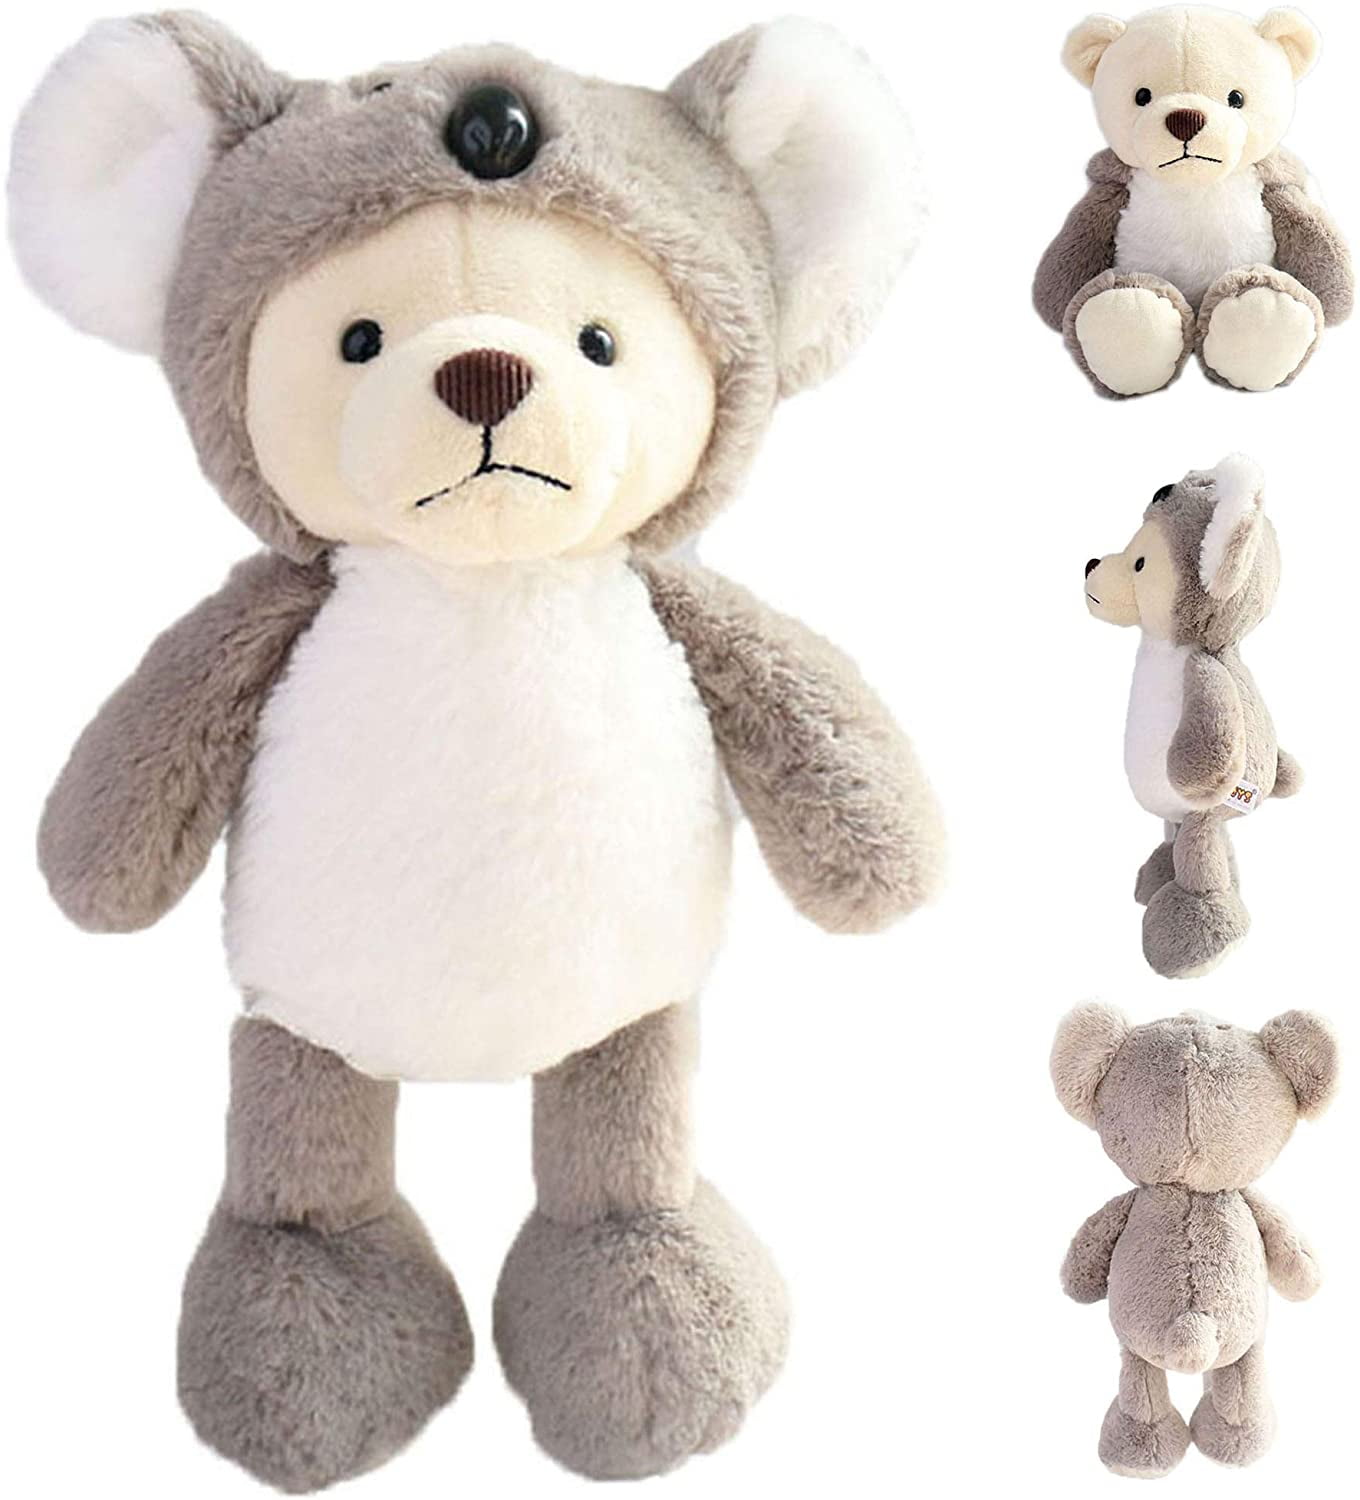 Polar Bear Stuffed Animal in Cute Koala Costume,Adorable Plushies Wearing  Gray Animal Outfit,Plush Toys as Great Gift for Kids. Stuffed Animals for  Daily,14-inch 